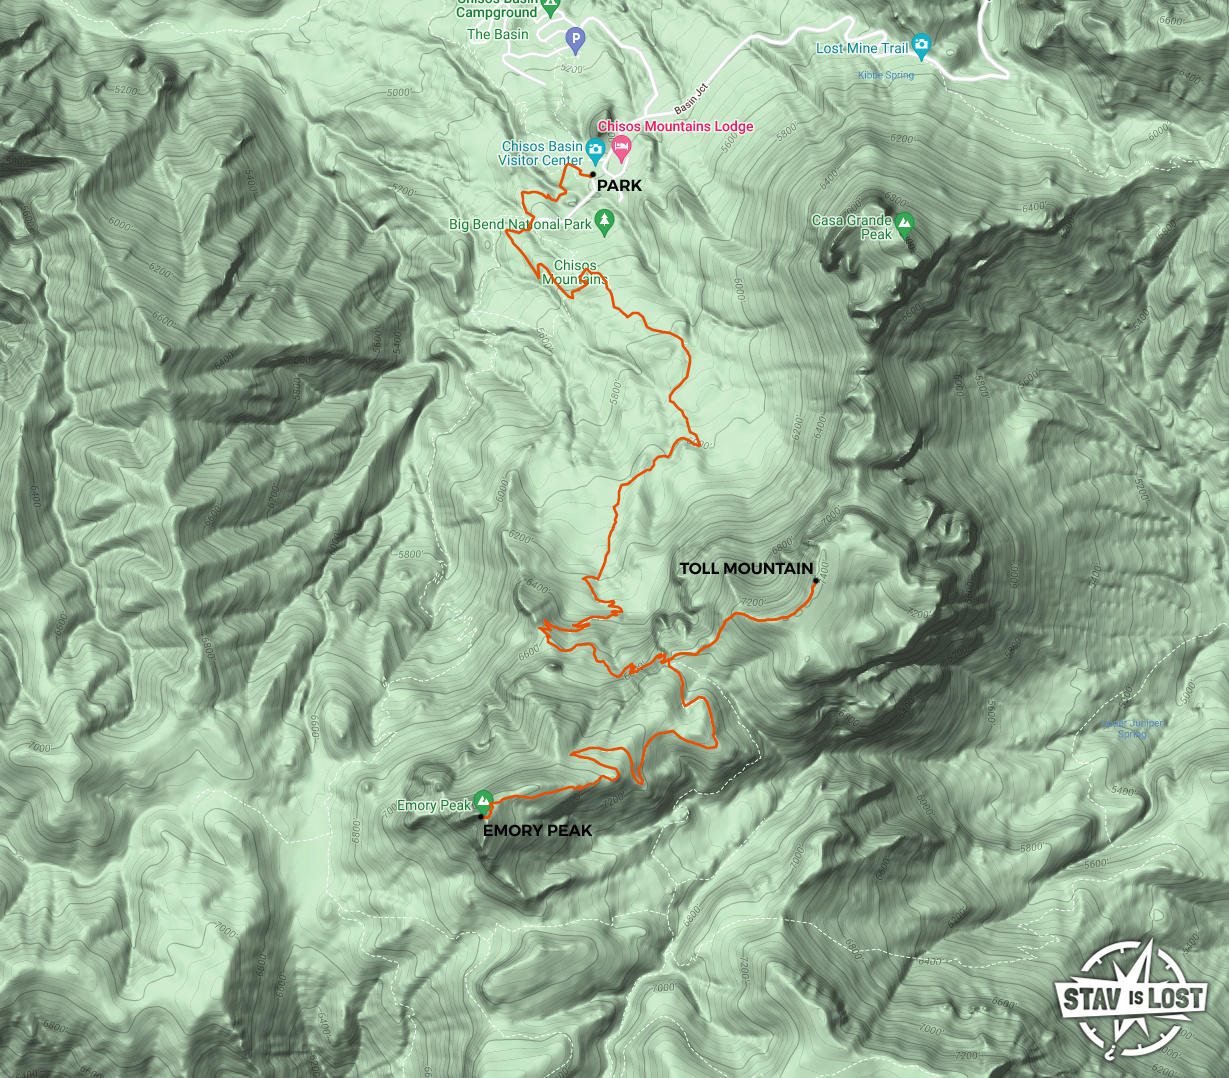 map for Emory Peak and Toll Mountain by stav is lost